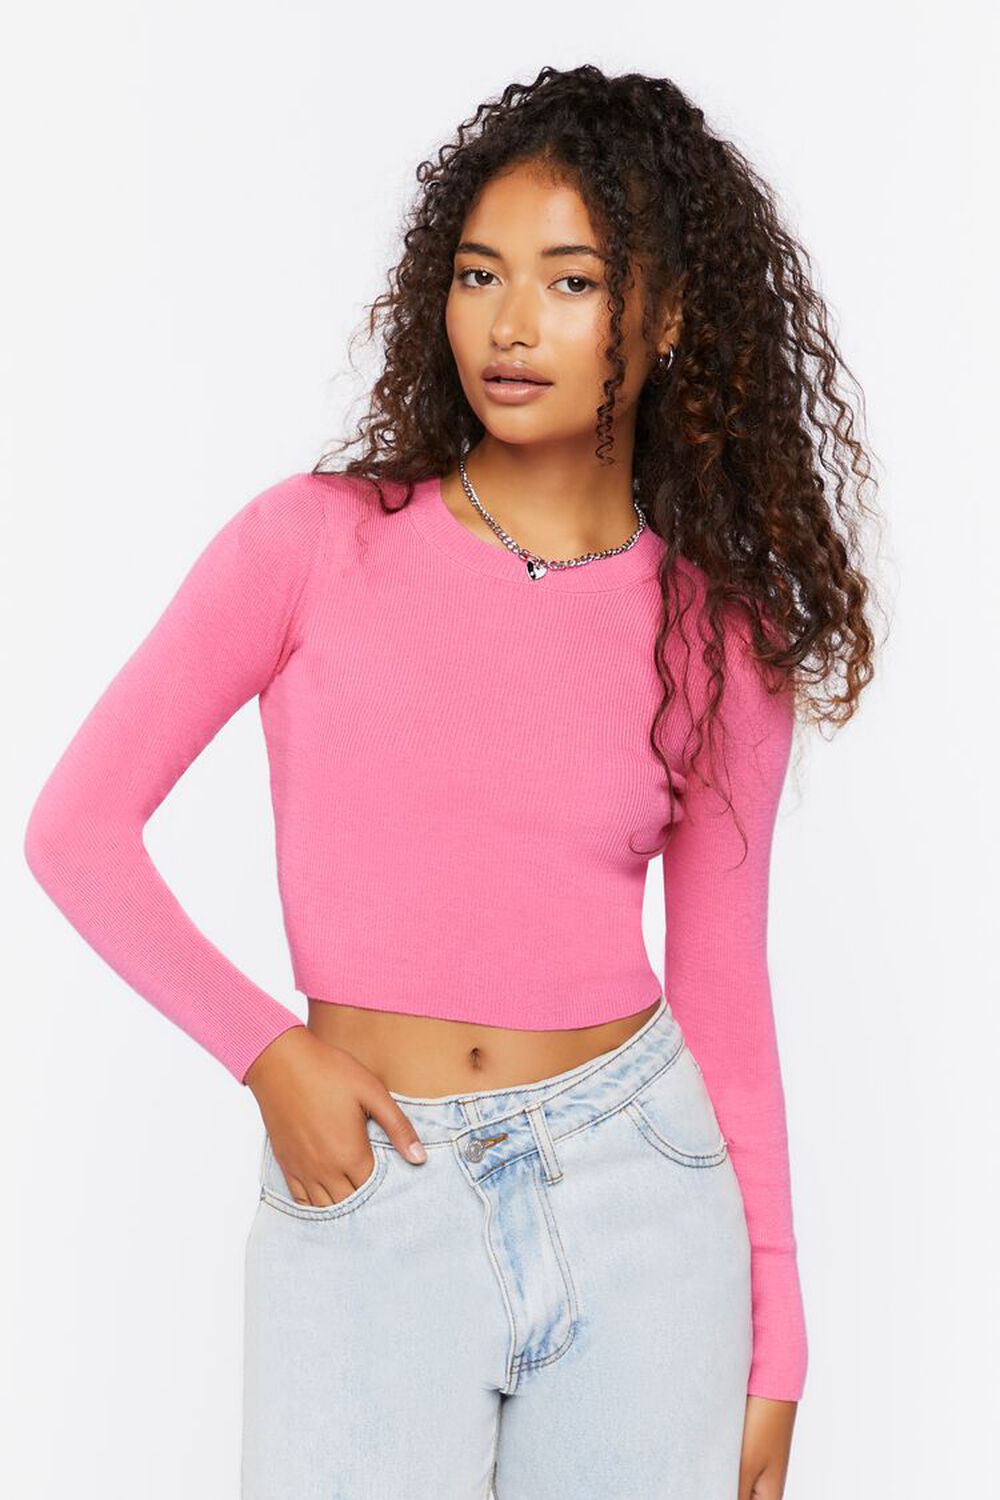 PINK Fitted Rib-Knit Sweater, image 1